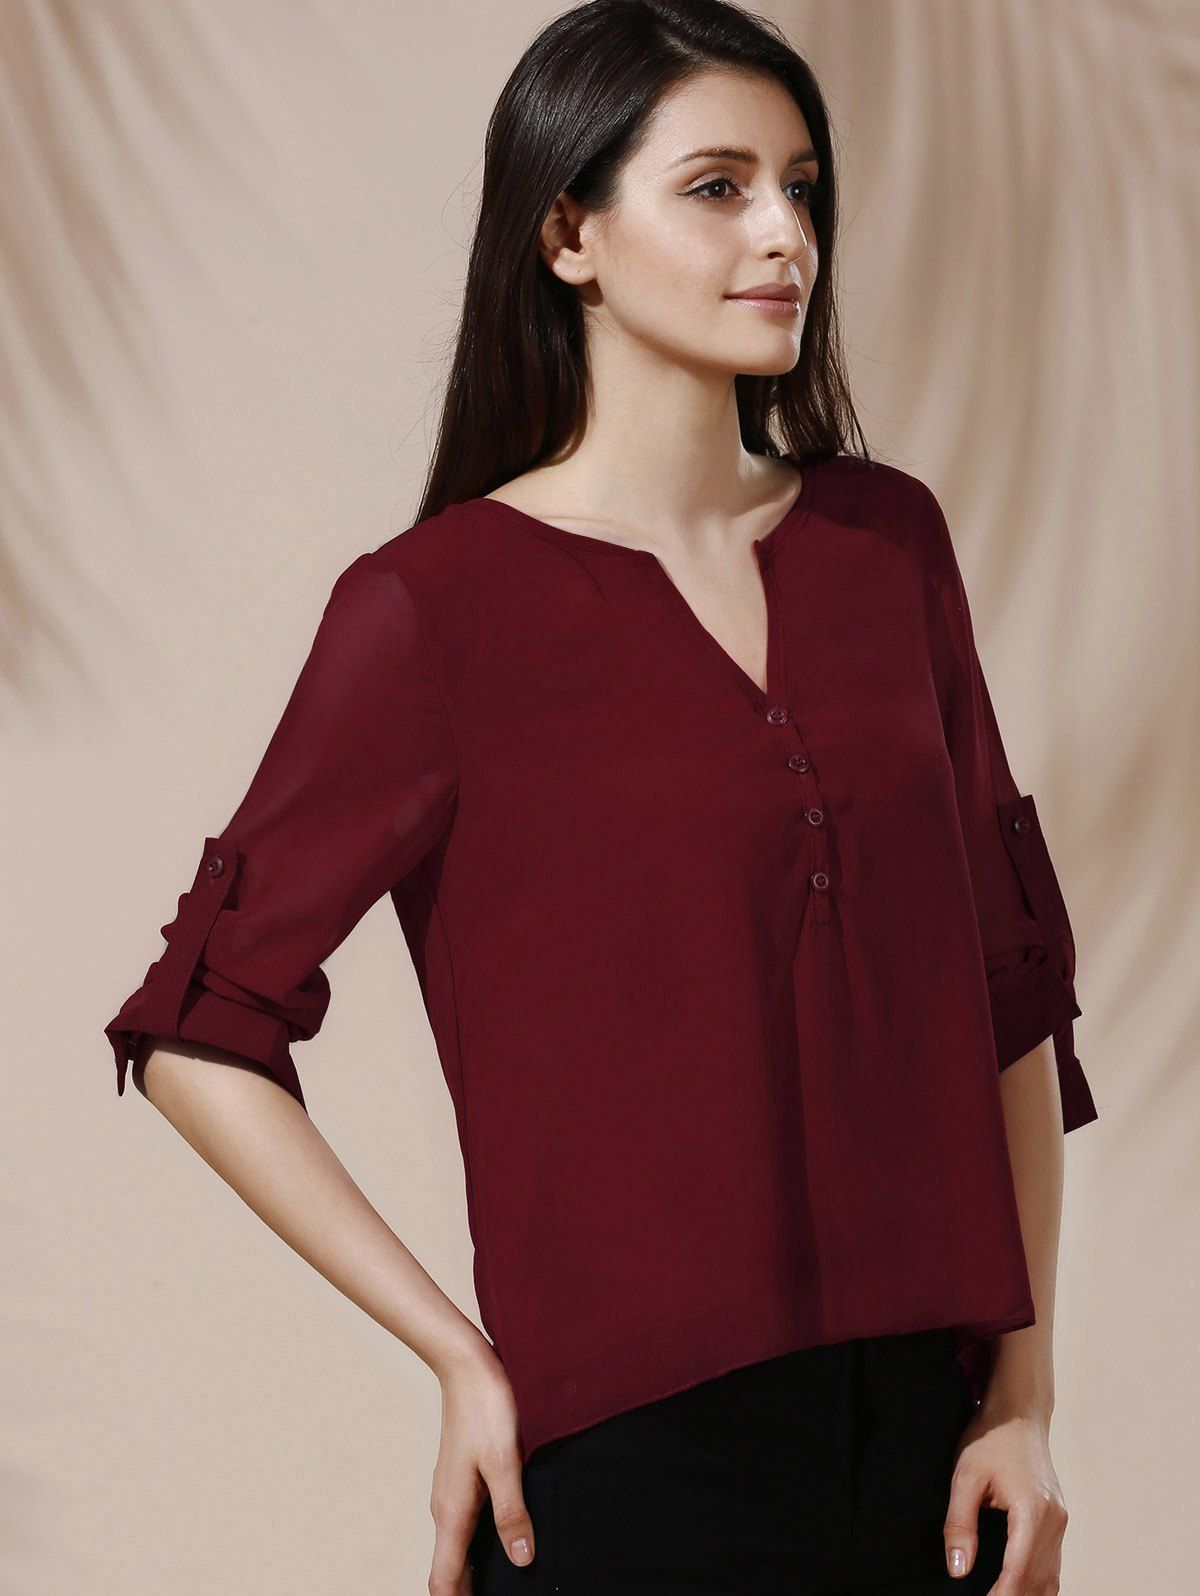 Womens dressy blouses for sale by owner